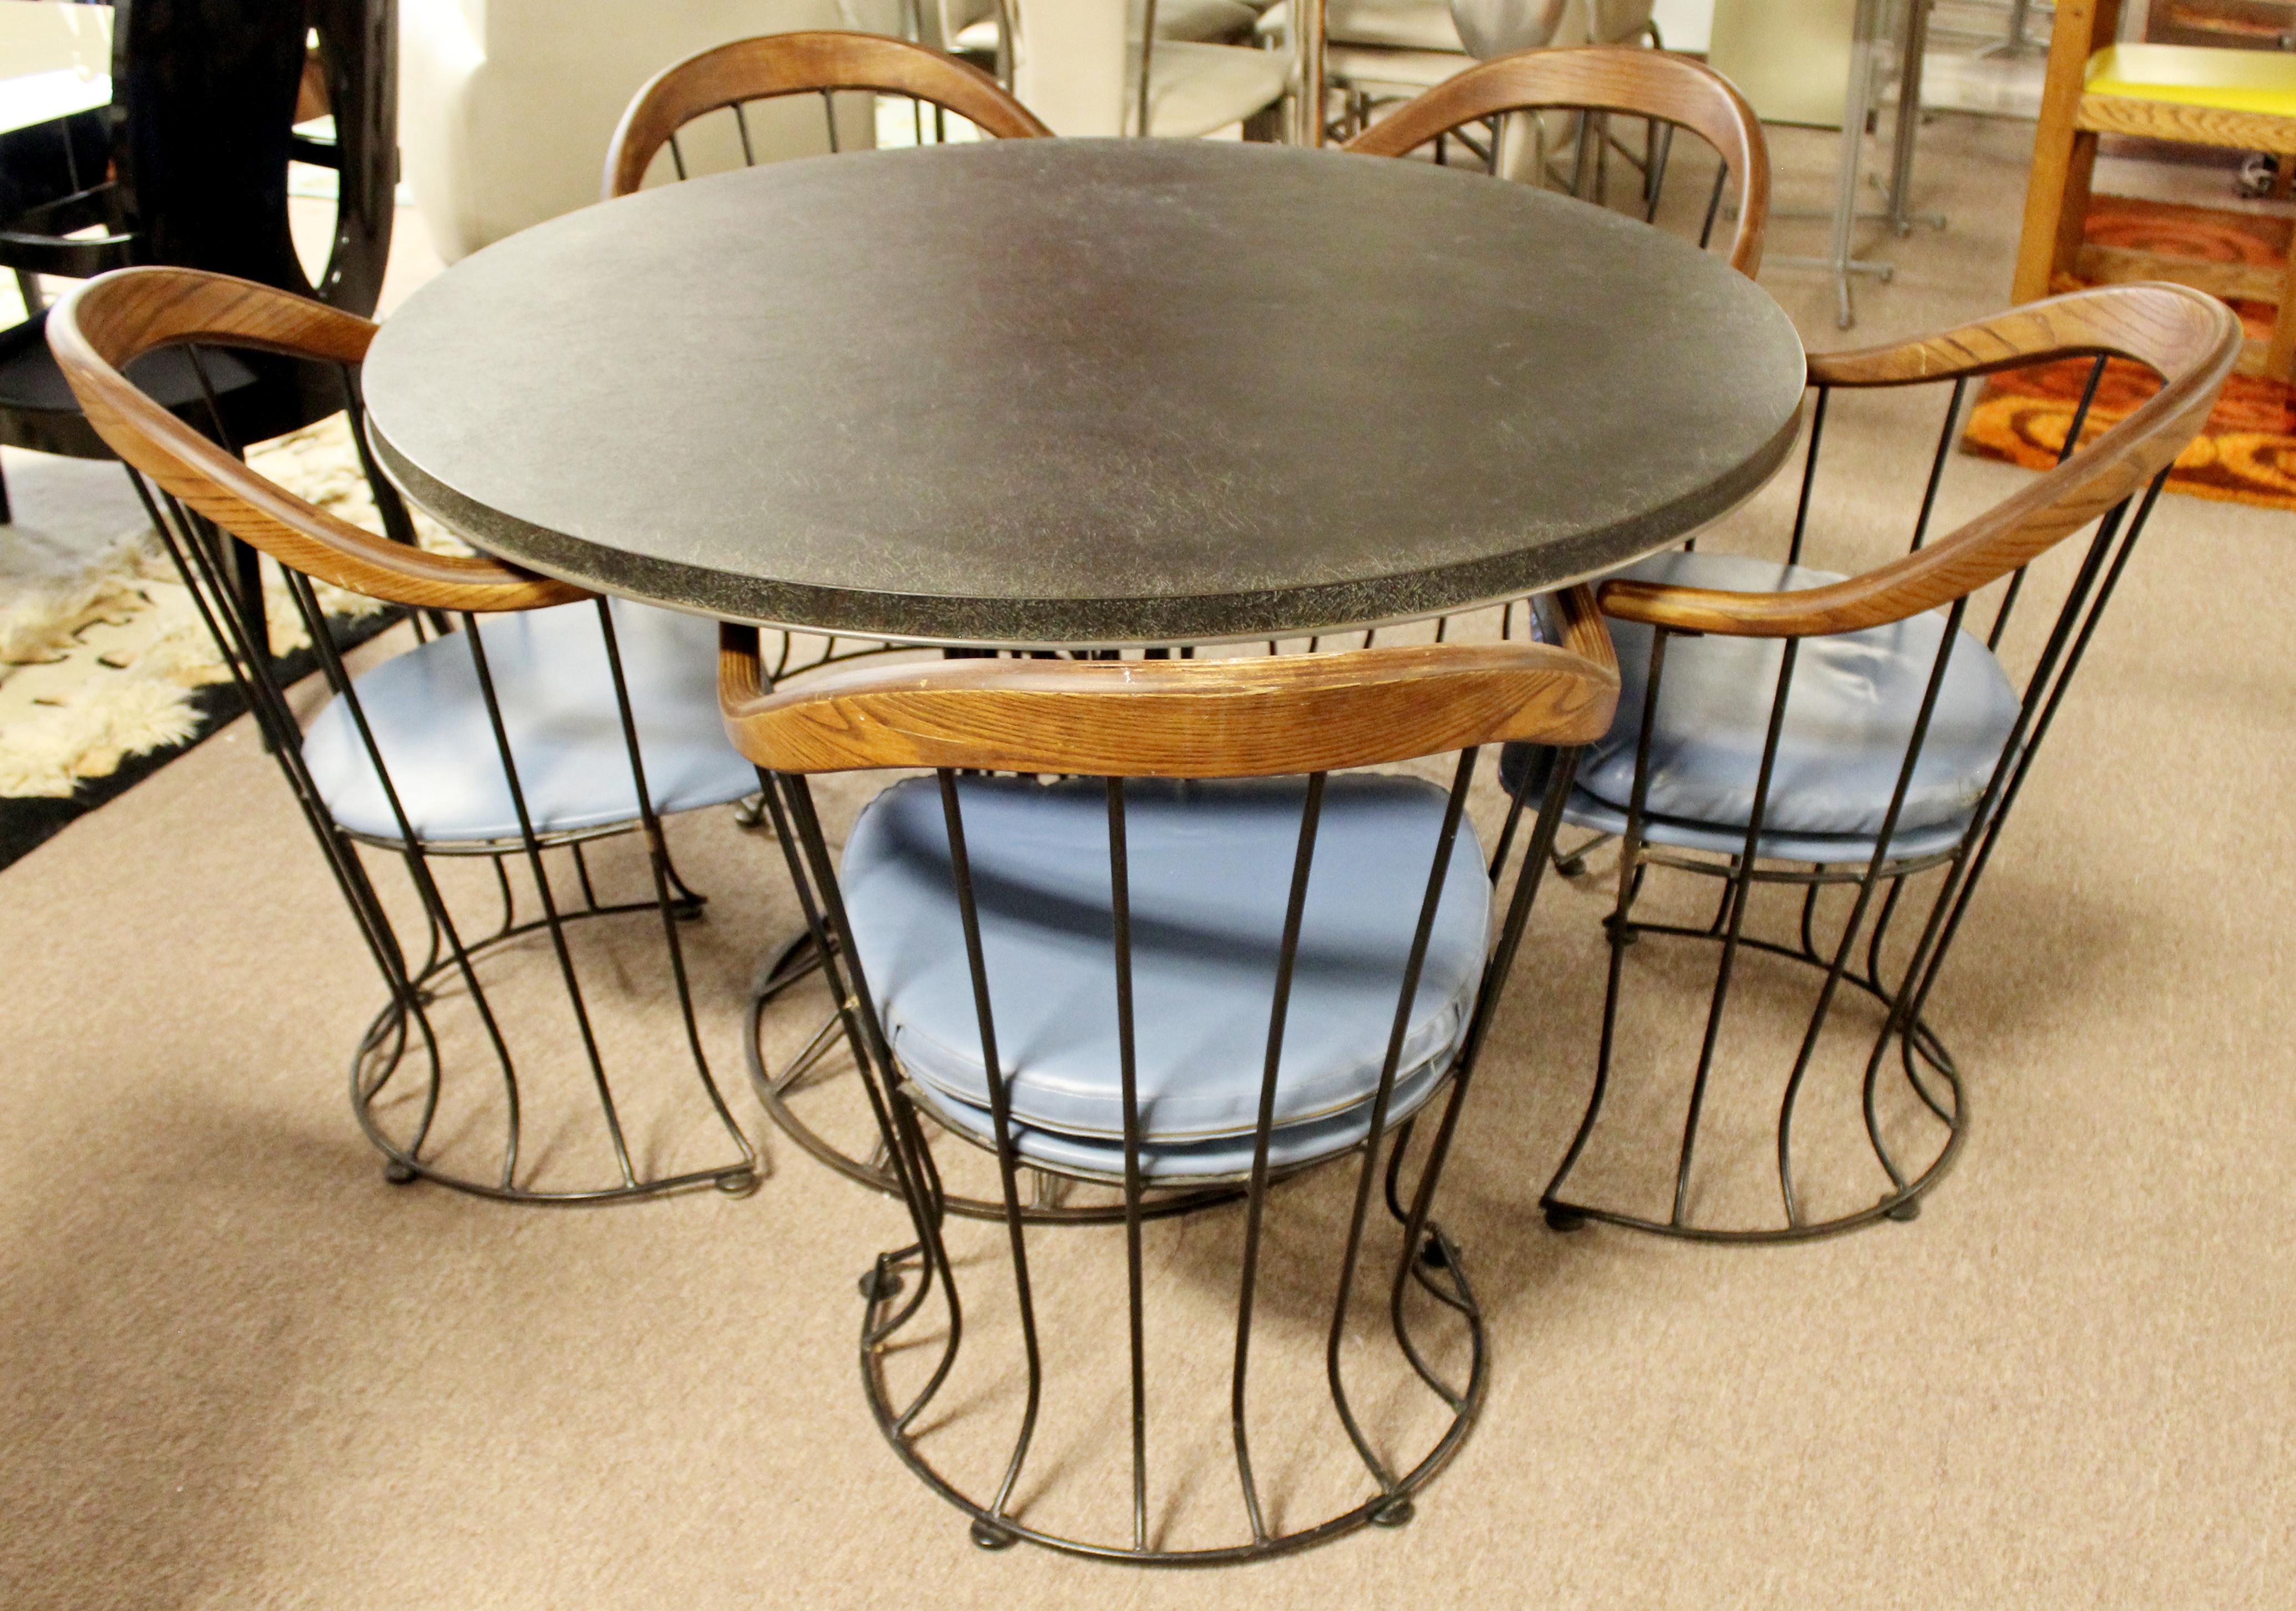 Mid-20th Century Mid-Century Modern Woodard Patio Dining Set Slate Table & 5 Curved Chairs, 1960s